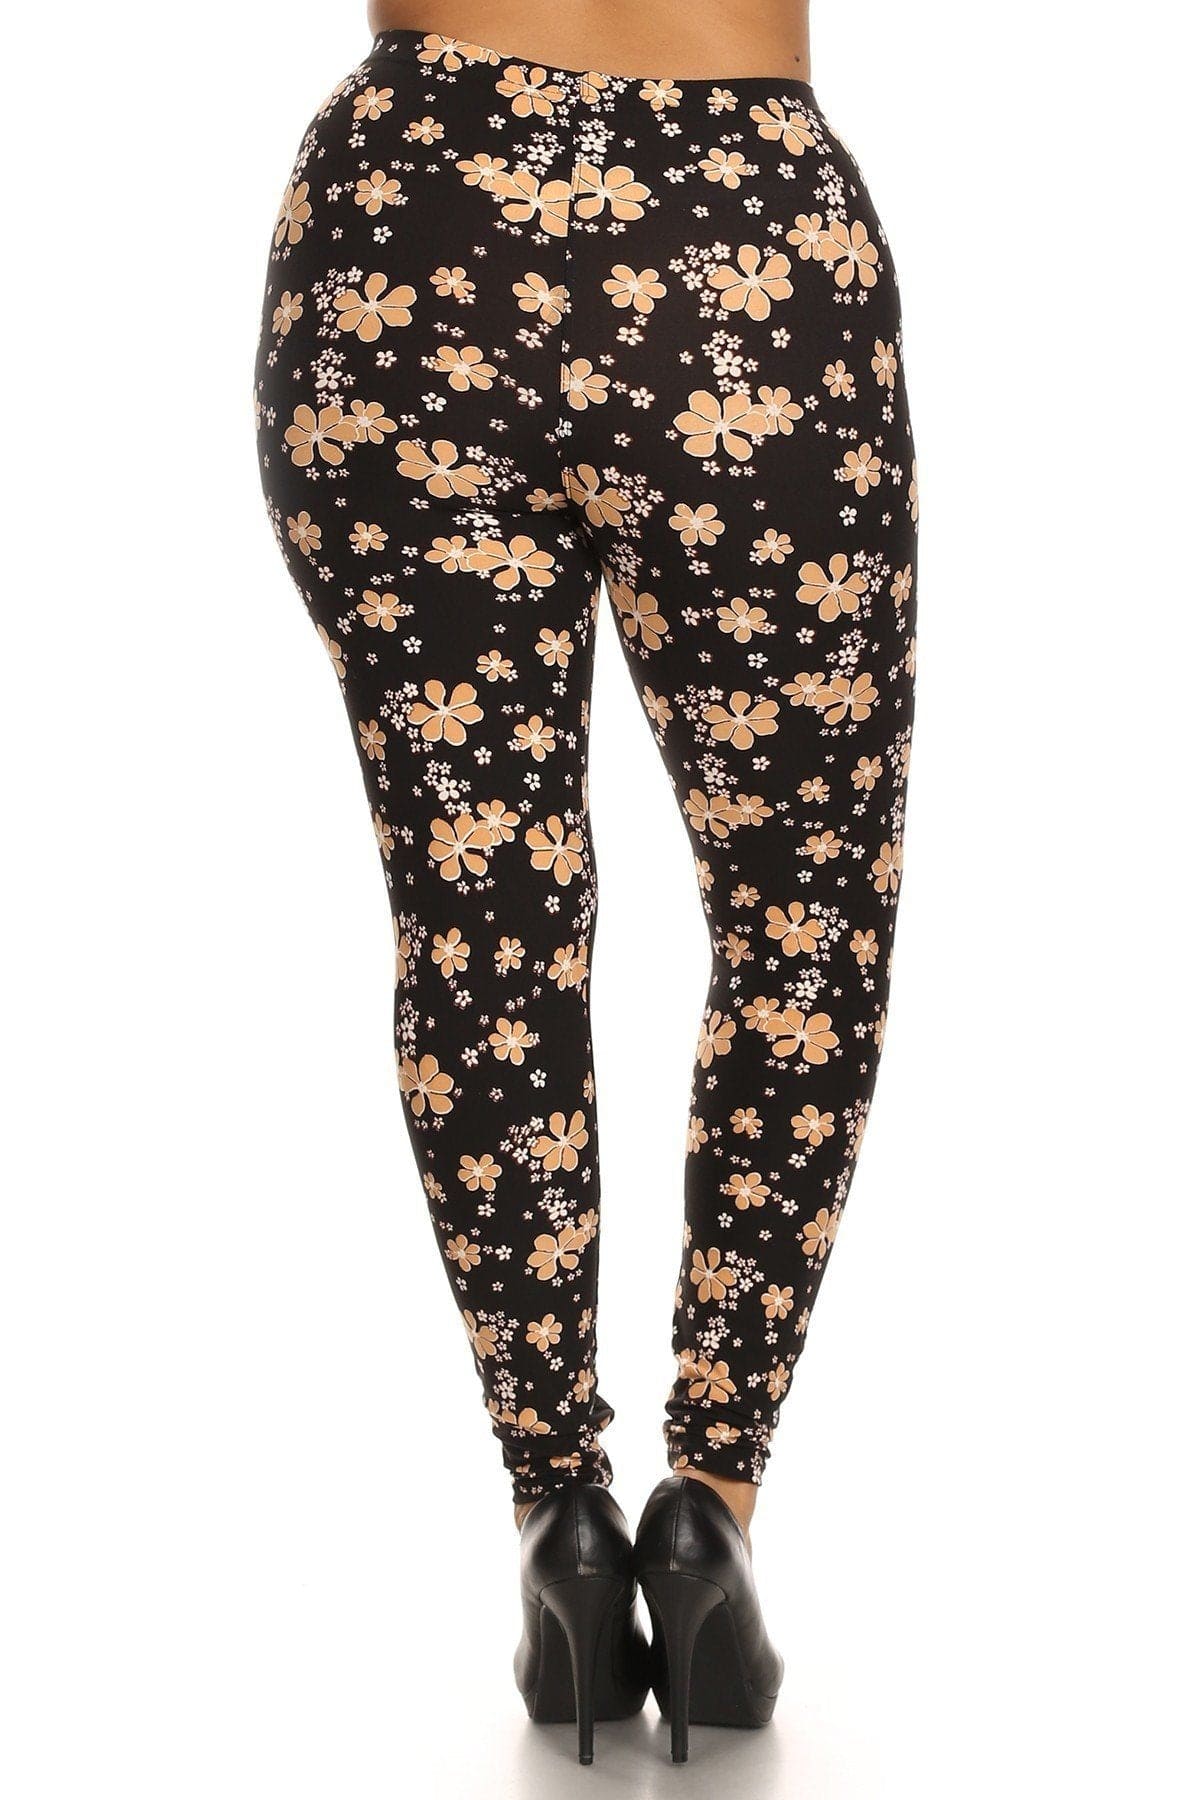 Super Soft Peach Skin Fabric, Floral Graphic Printed Knit Legging With Elastic Waist Detail. High Waist Fit - Fashion Quality Boutik